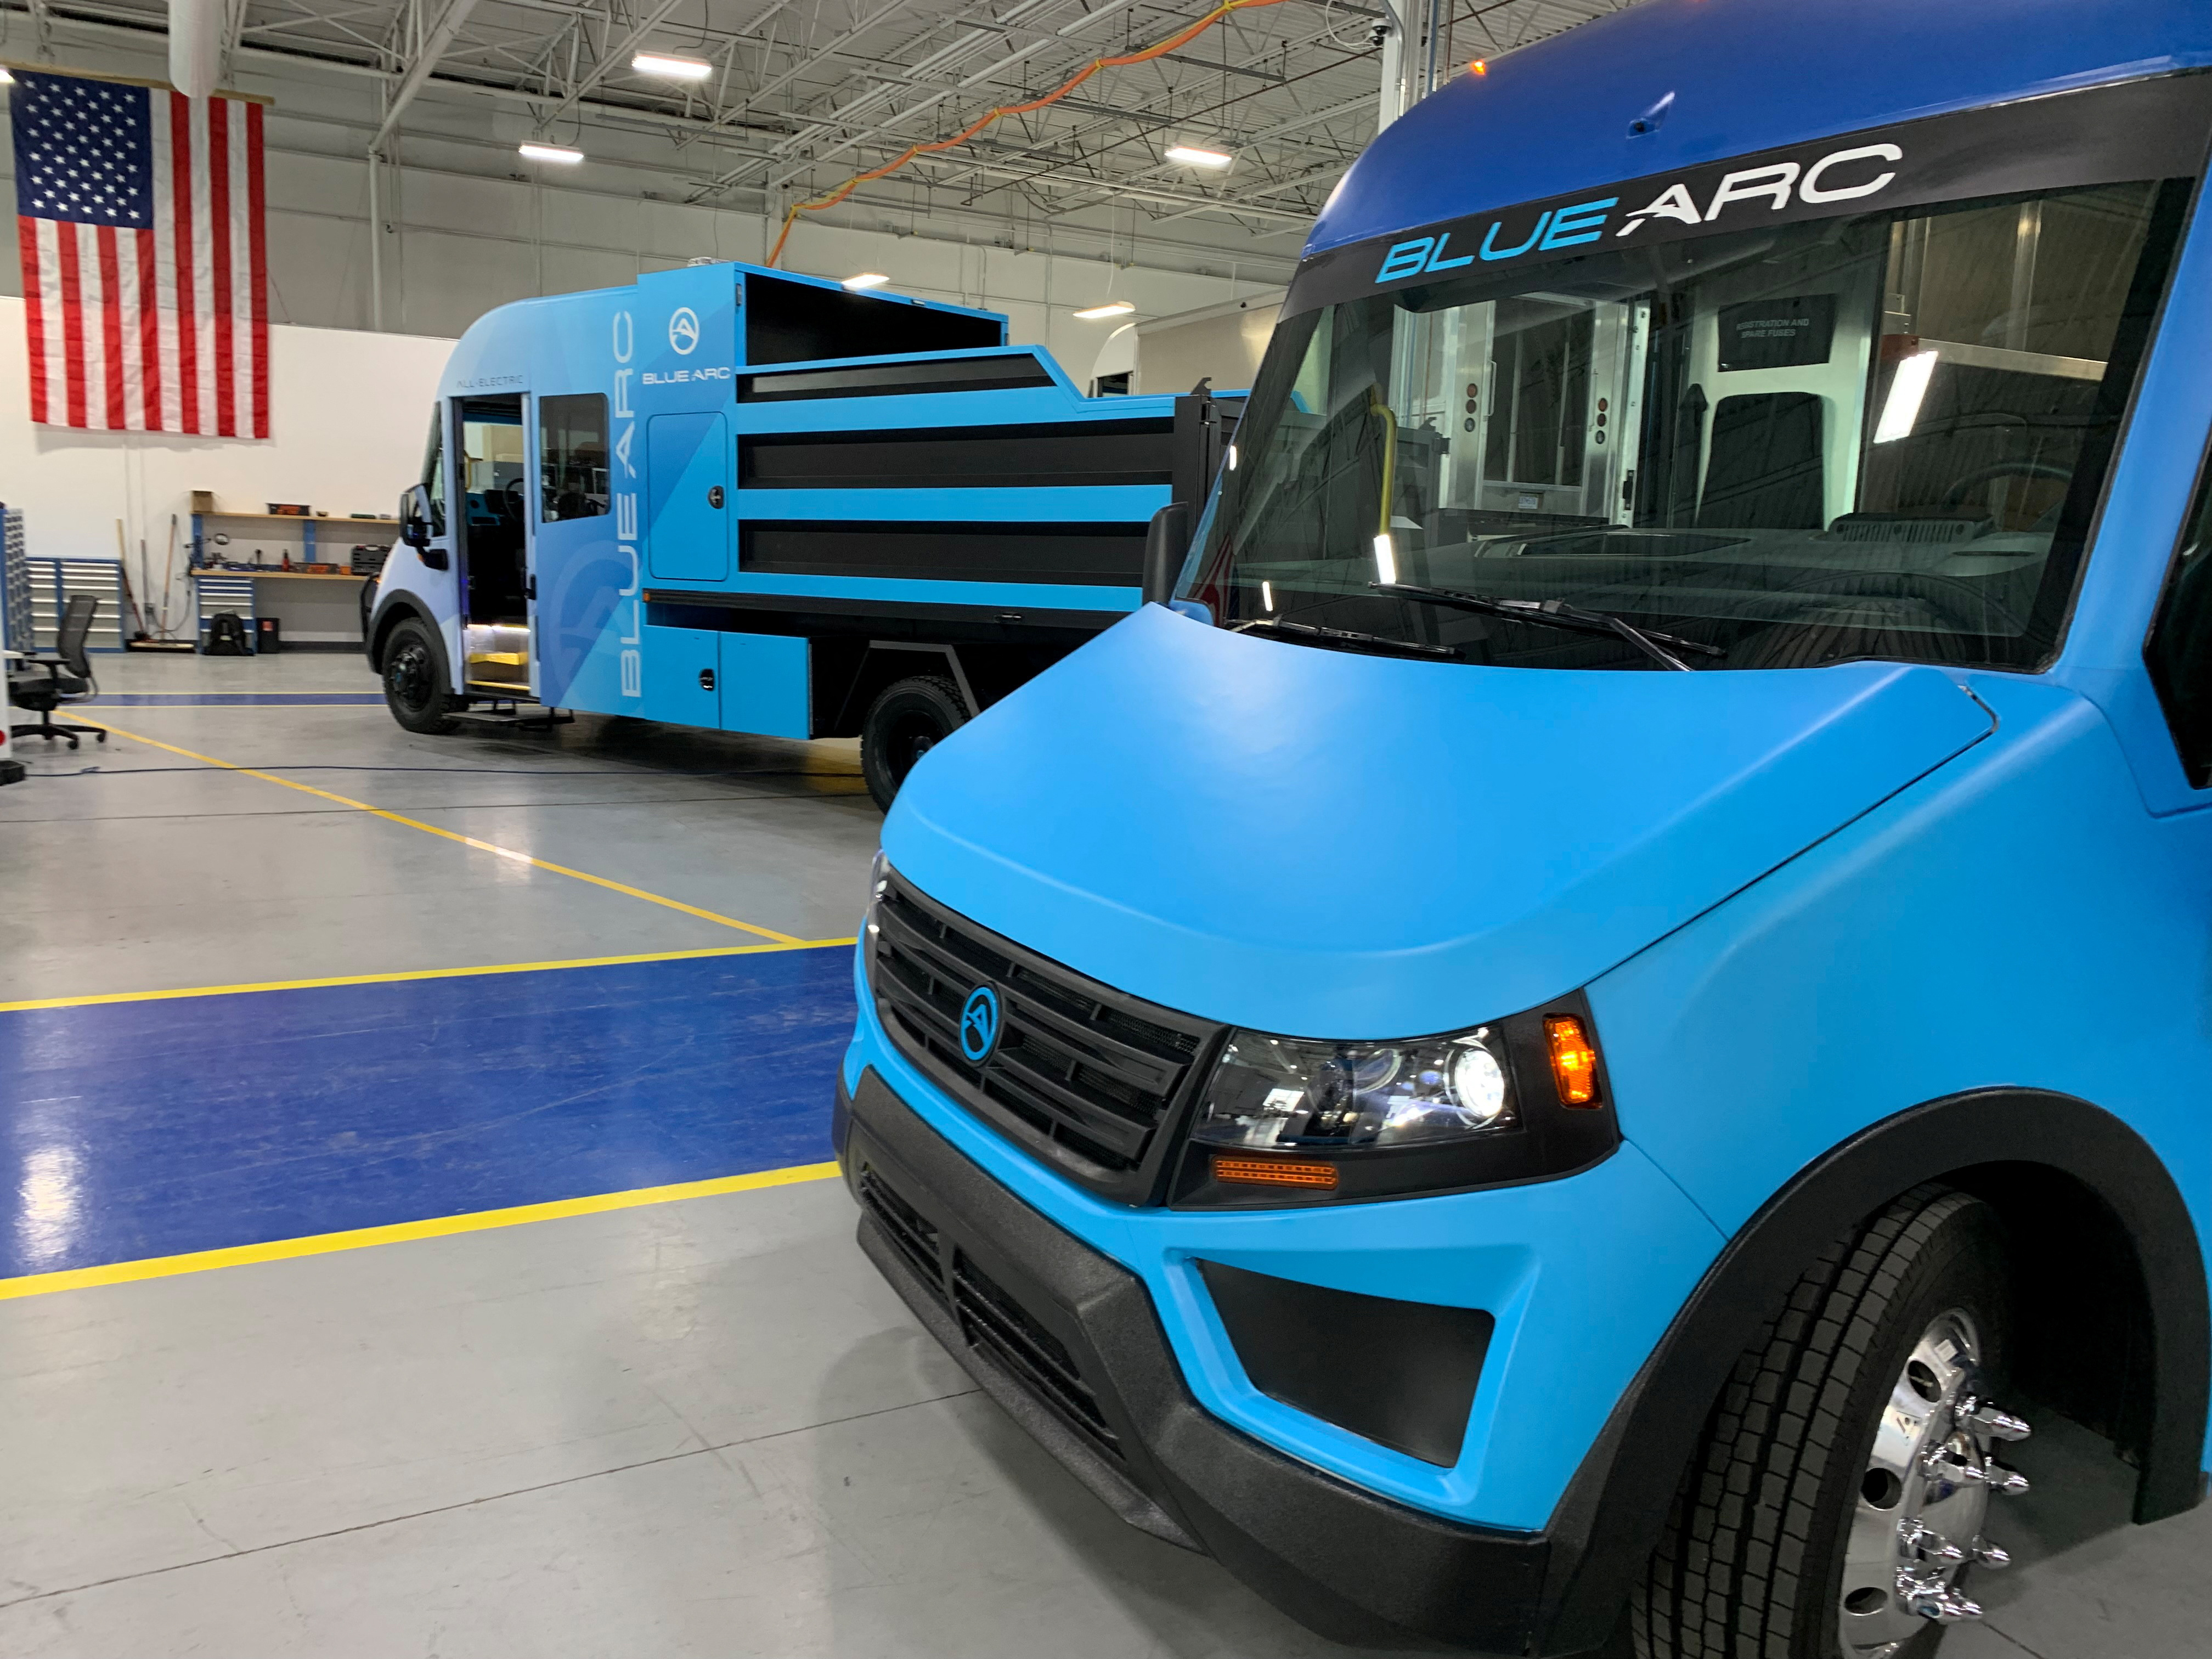 Blue Arc electric delivery truck and van are seen in a Shyft Group assembly facility in Novi